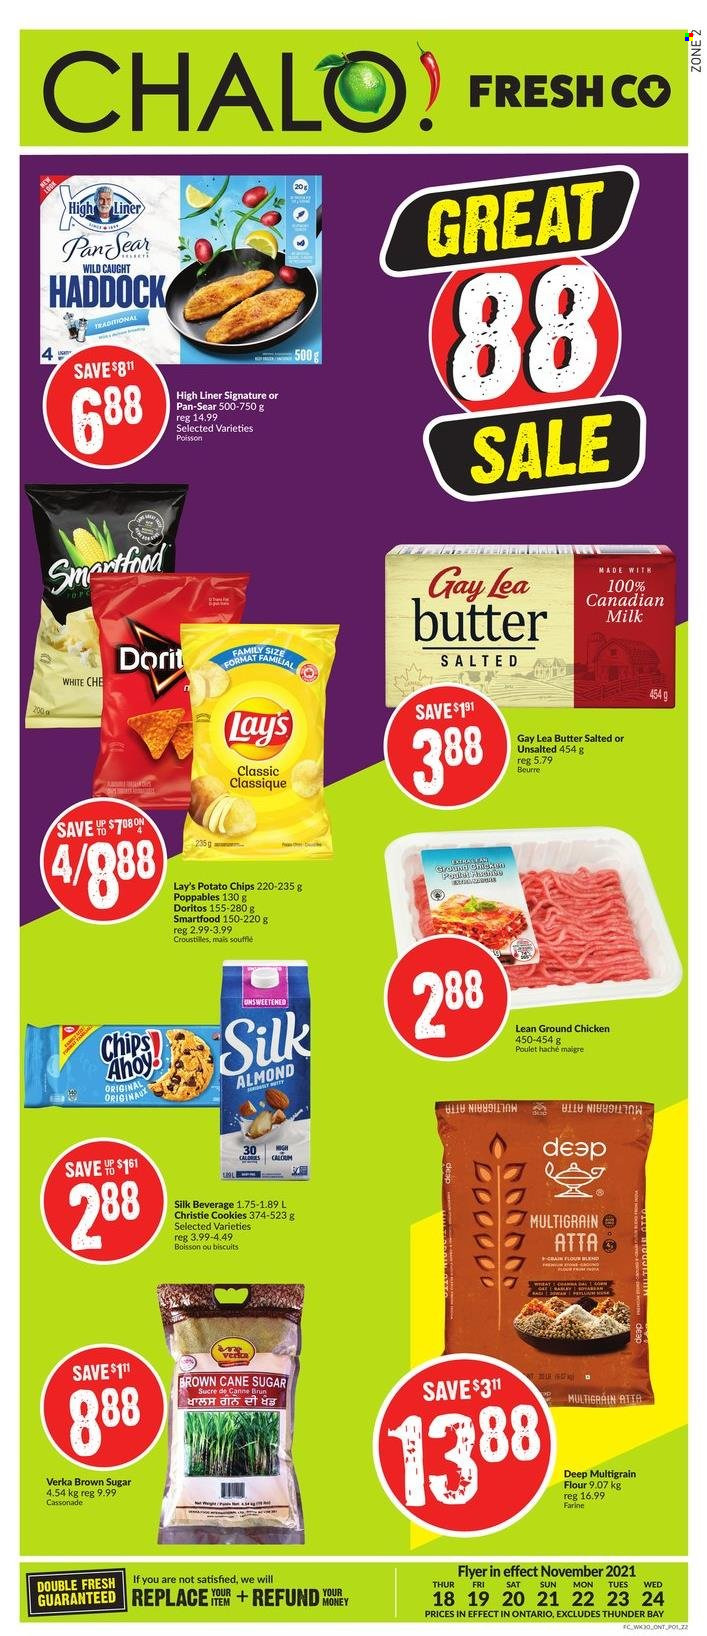 thumbnail - Circulaire Chalo! FreshCo. - 25 Novembre 2021 - 01 Décembre 2021 - Produits soldés - biscuits, cookies, chips, Lay’s, cassonade, farine, sucre, haddock. Page 1.